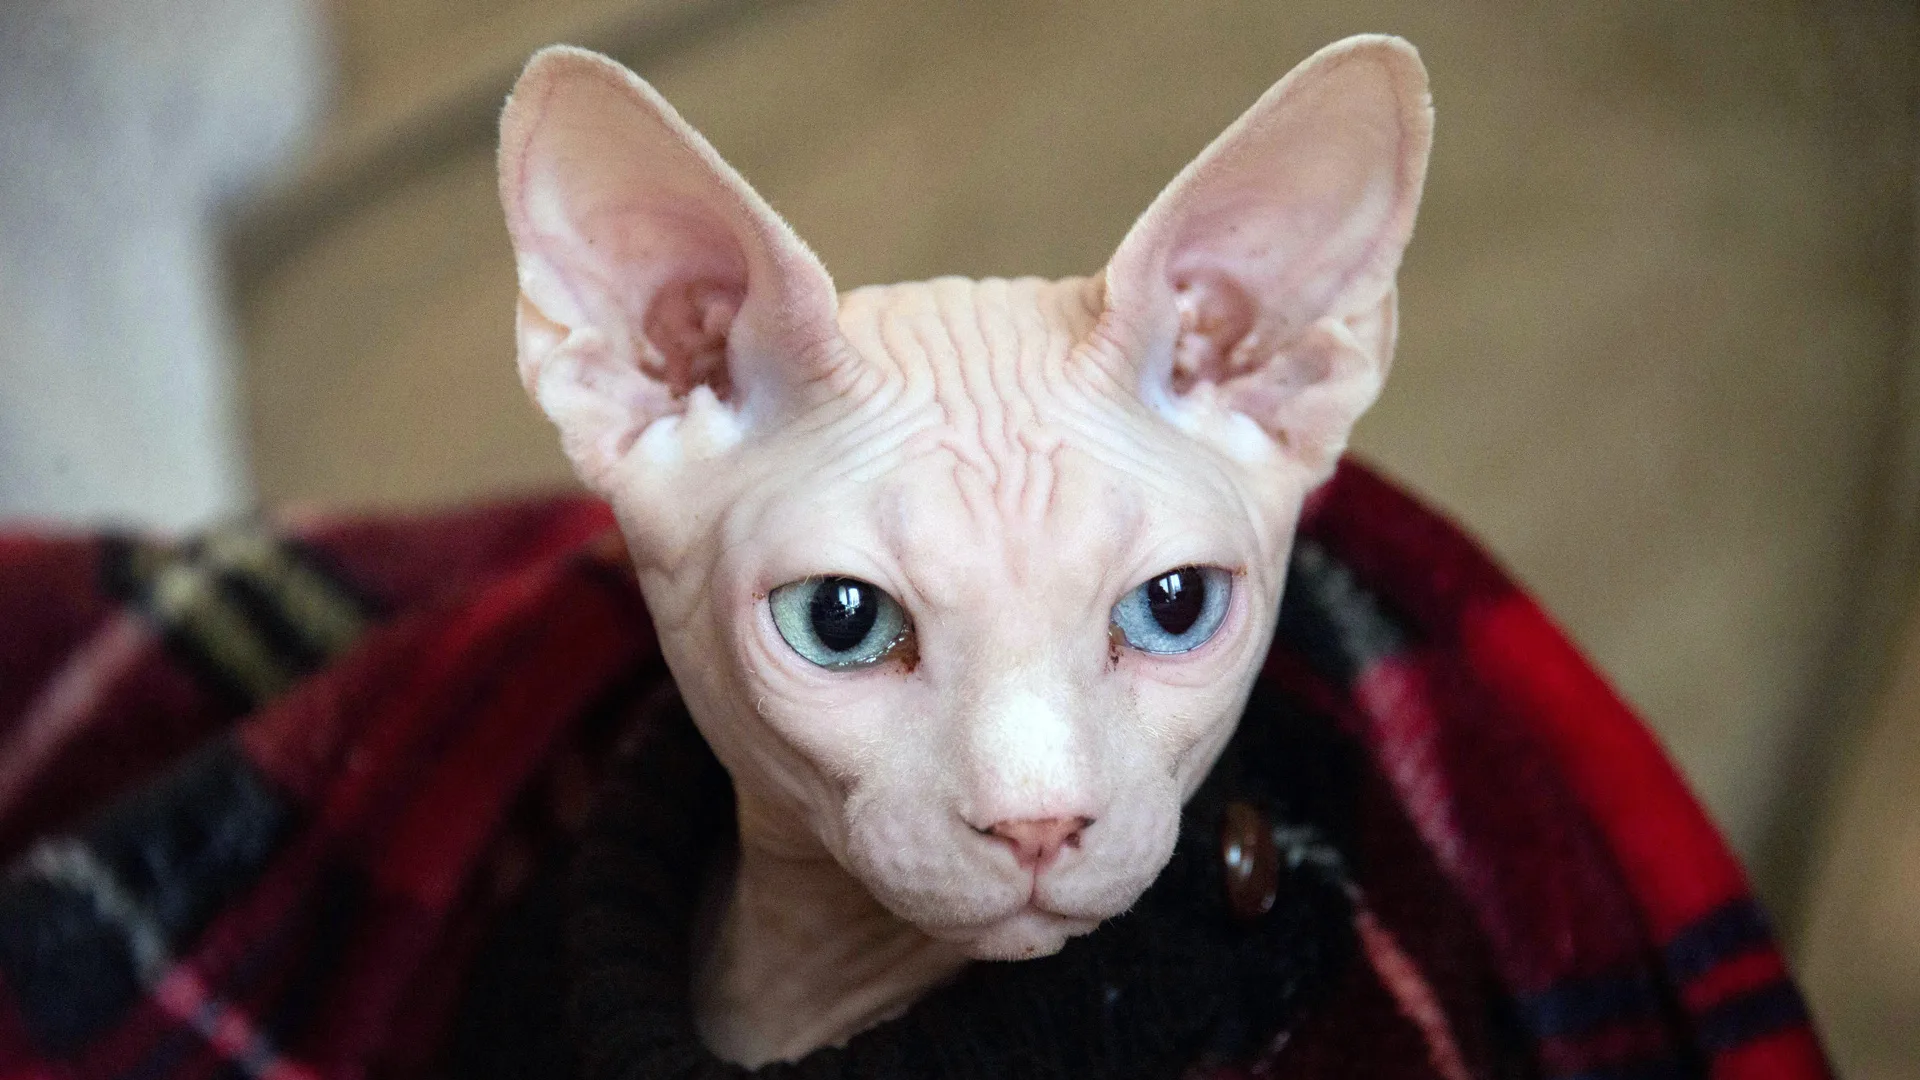 A photograph of a sphynx cat wrapped in a red blanket